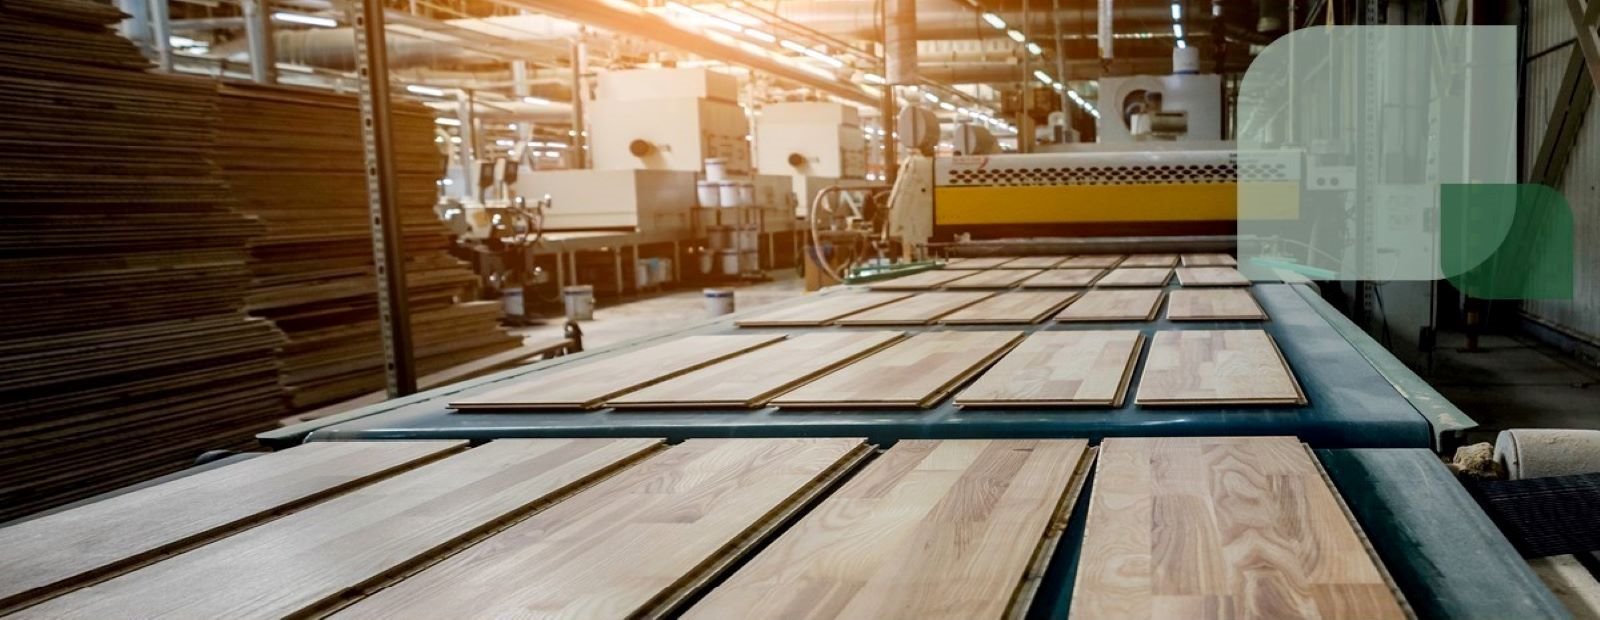 Accelerate Adoption of Wood Processing Innovation Program grant round